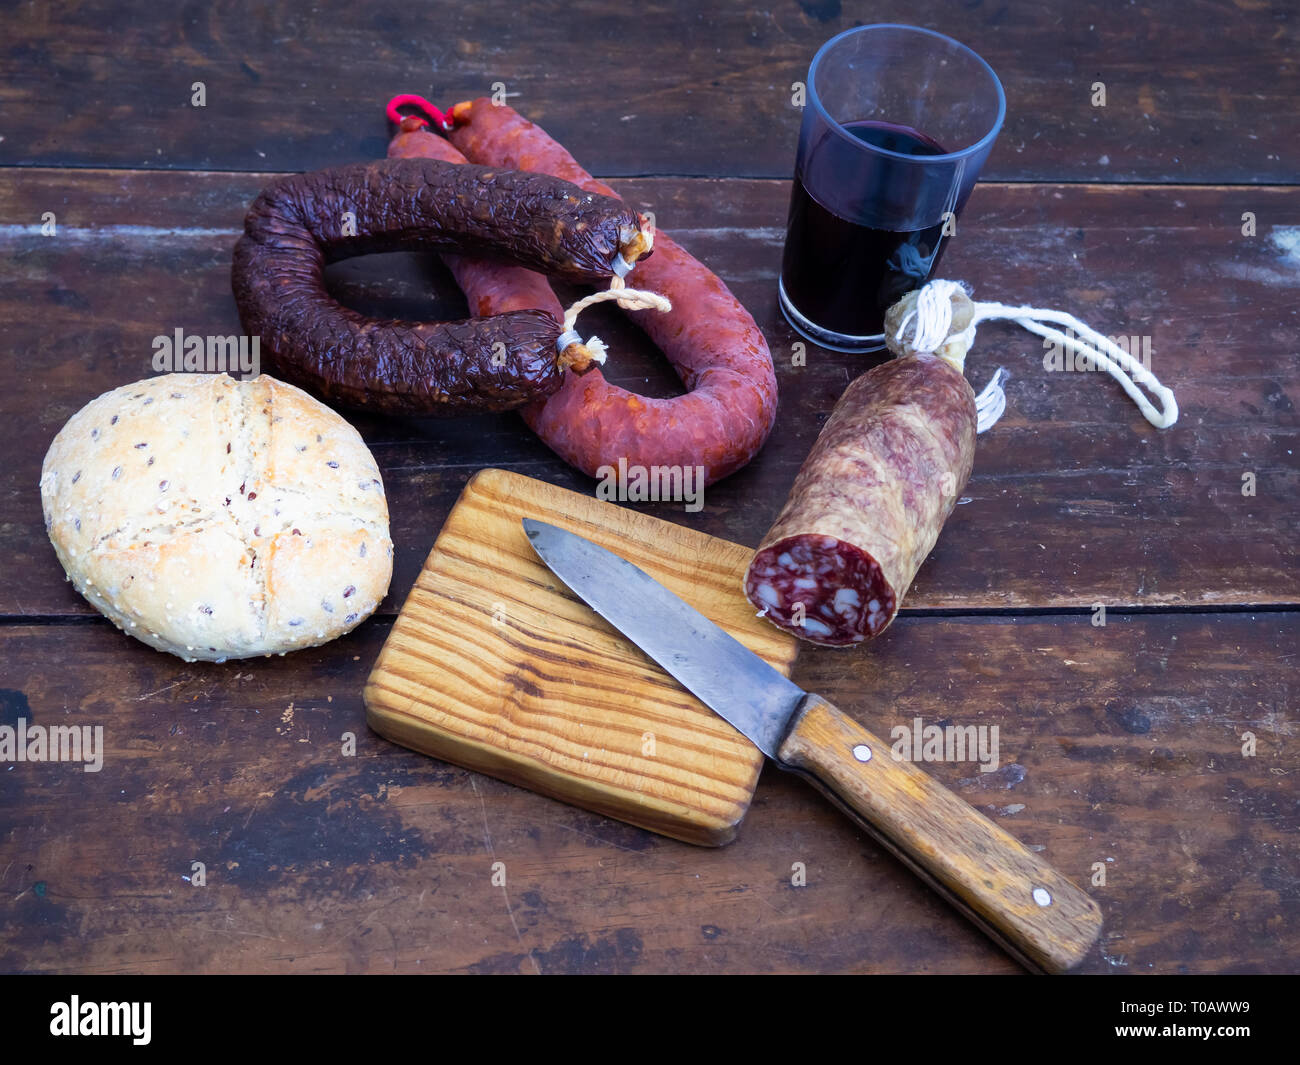 Iberian pork sausages on an old wooden board with a wedge of sheep cheese, an antique knife and a glass of red spanish wine Stock Photo